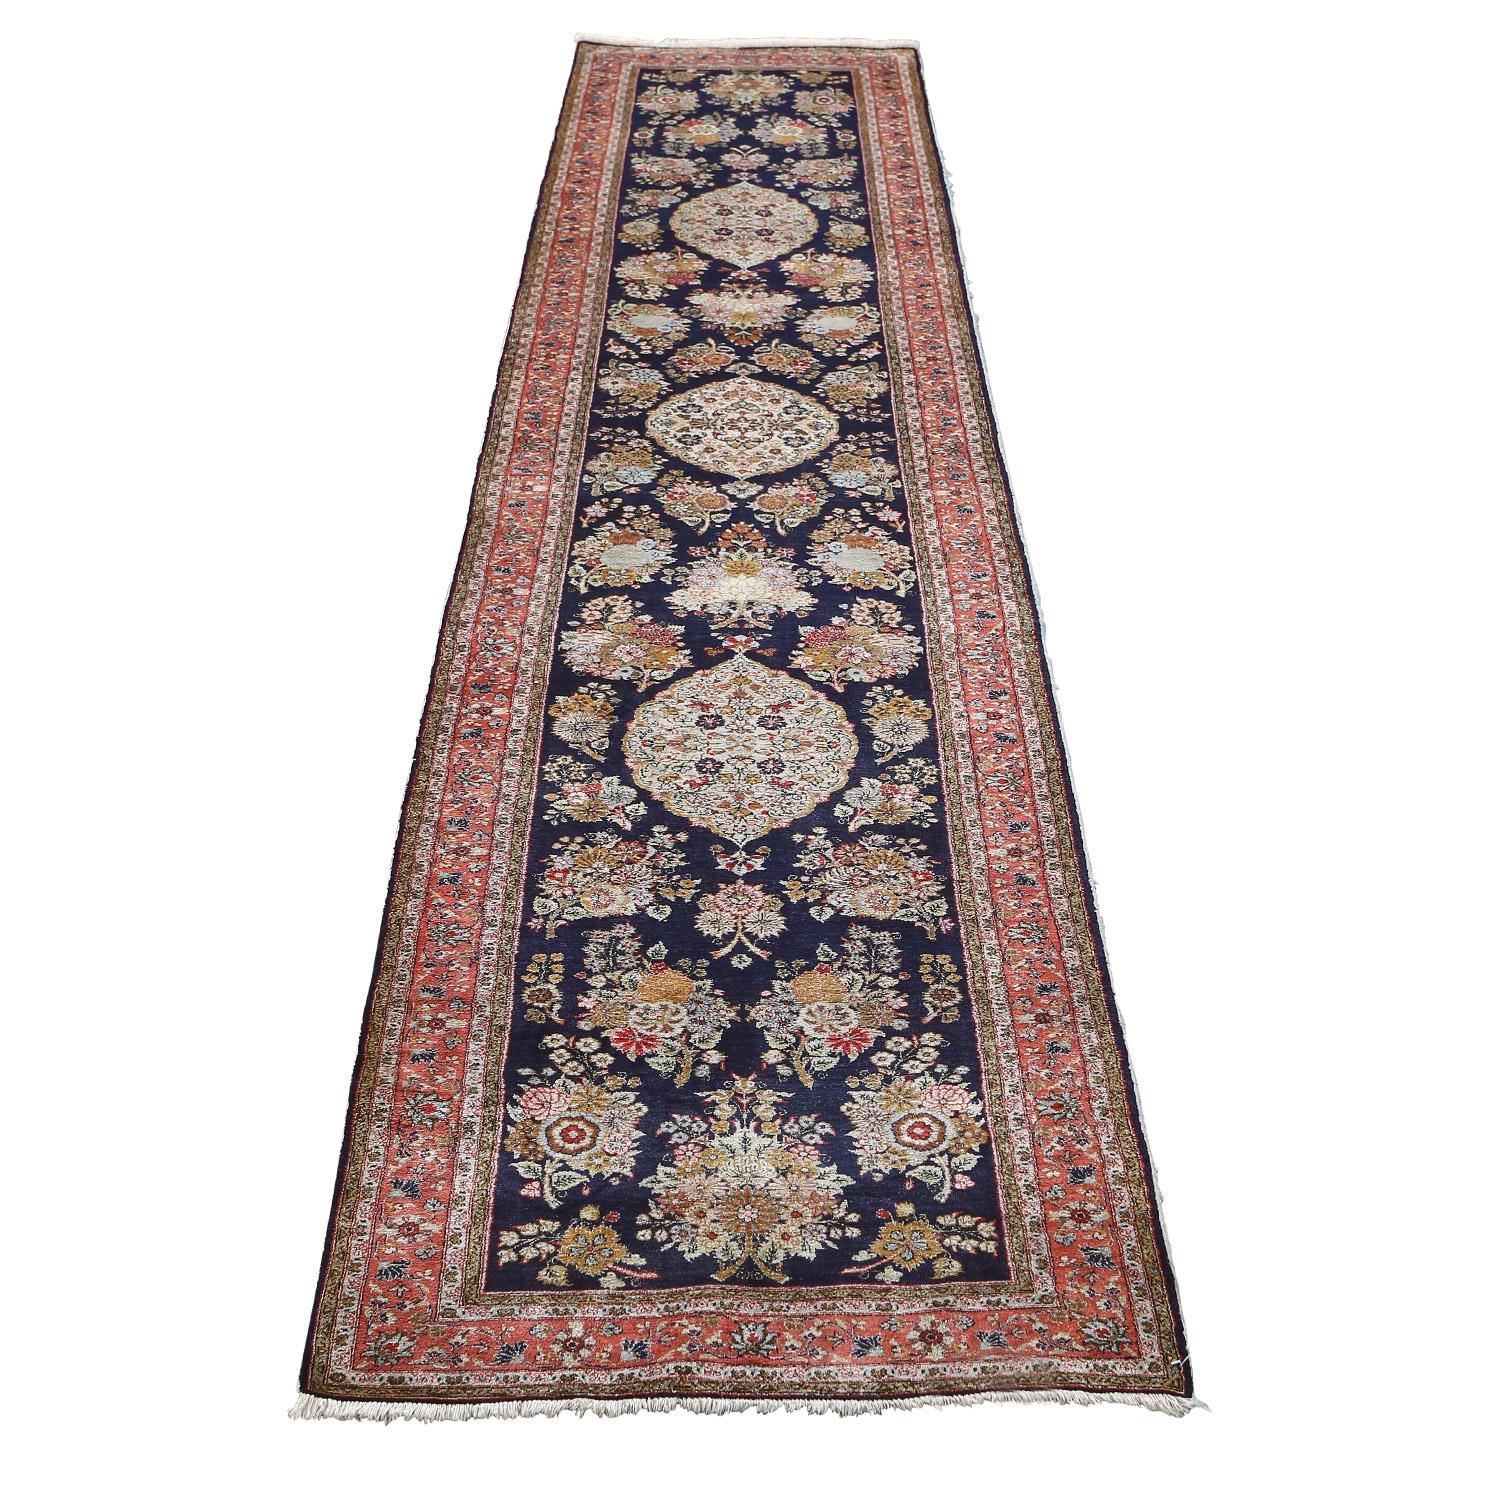 This vintage Qom Arsalani runner rug is a true gem of the weaving world. Crafted with a silk pile and silk foundation, it offers unparalleled luxury and durability, ensuring a velvety soft texture underfoot.

The rug features a mesmerizing medallion